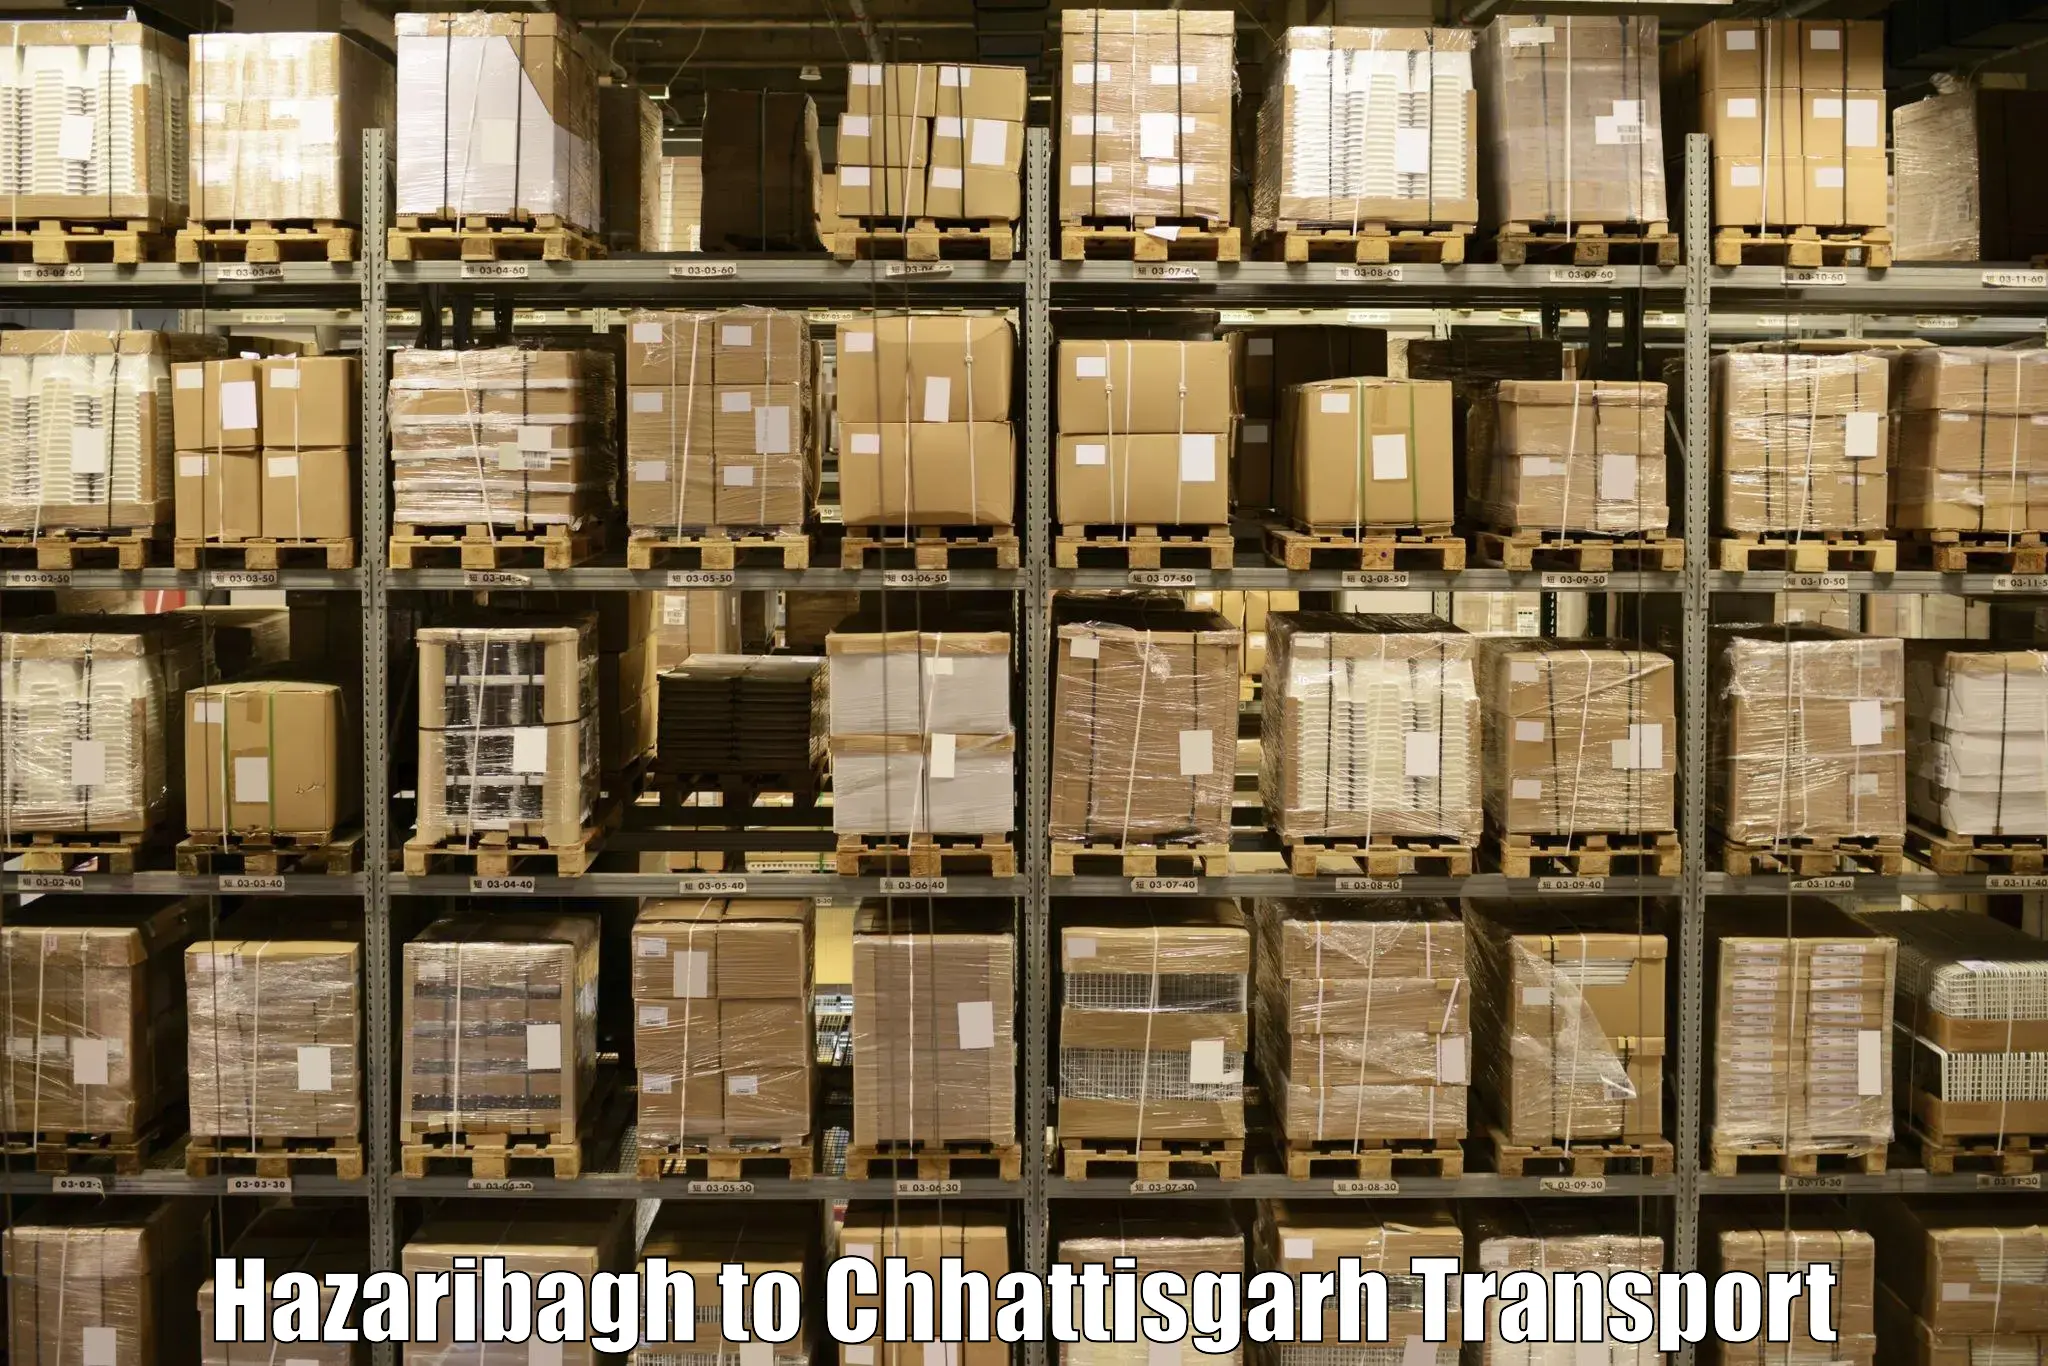 Daily parcel service transport Hazaribagh to Raigarh